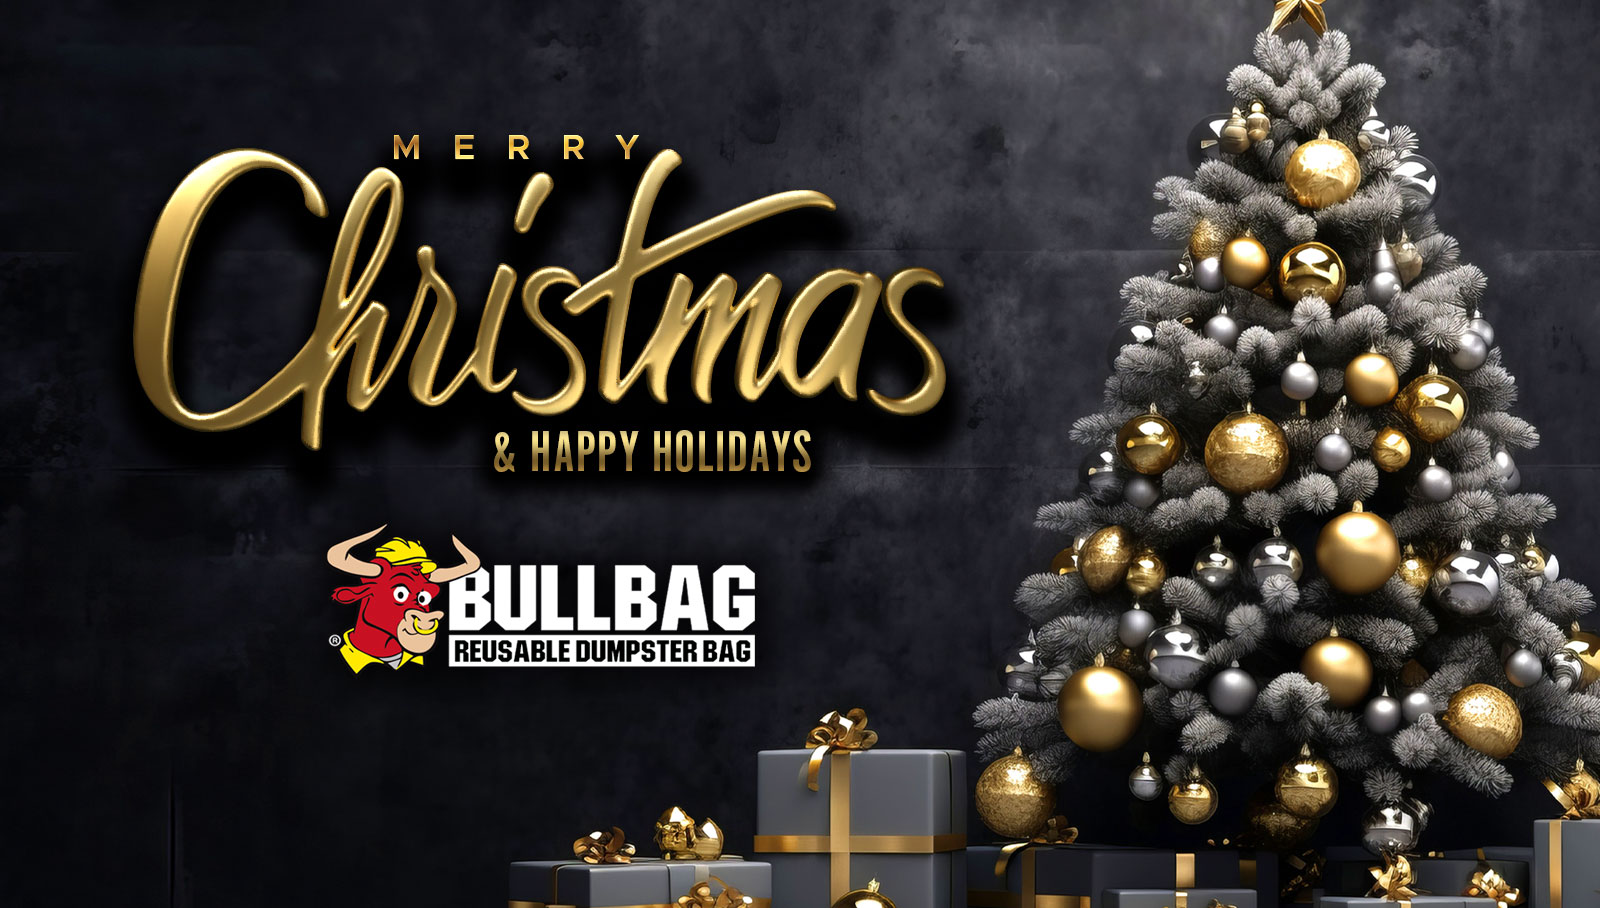 The BullBag is then ONLY reusable and foldable dumpster bag that was  designed and built to be Contractor Tough ™ #BullBag …